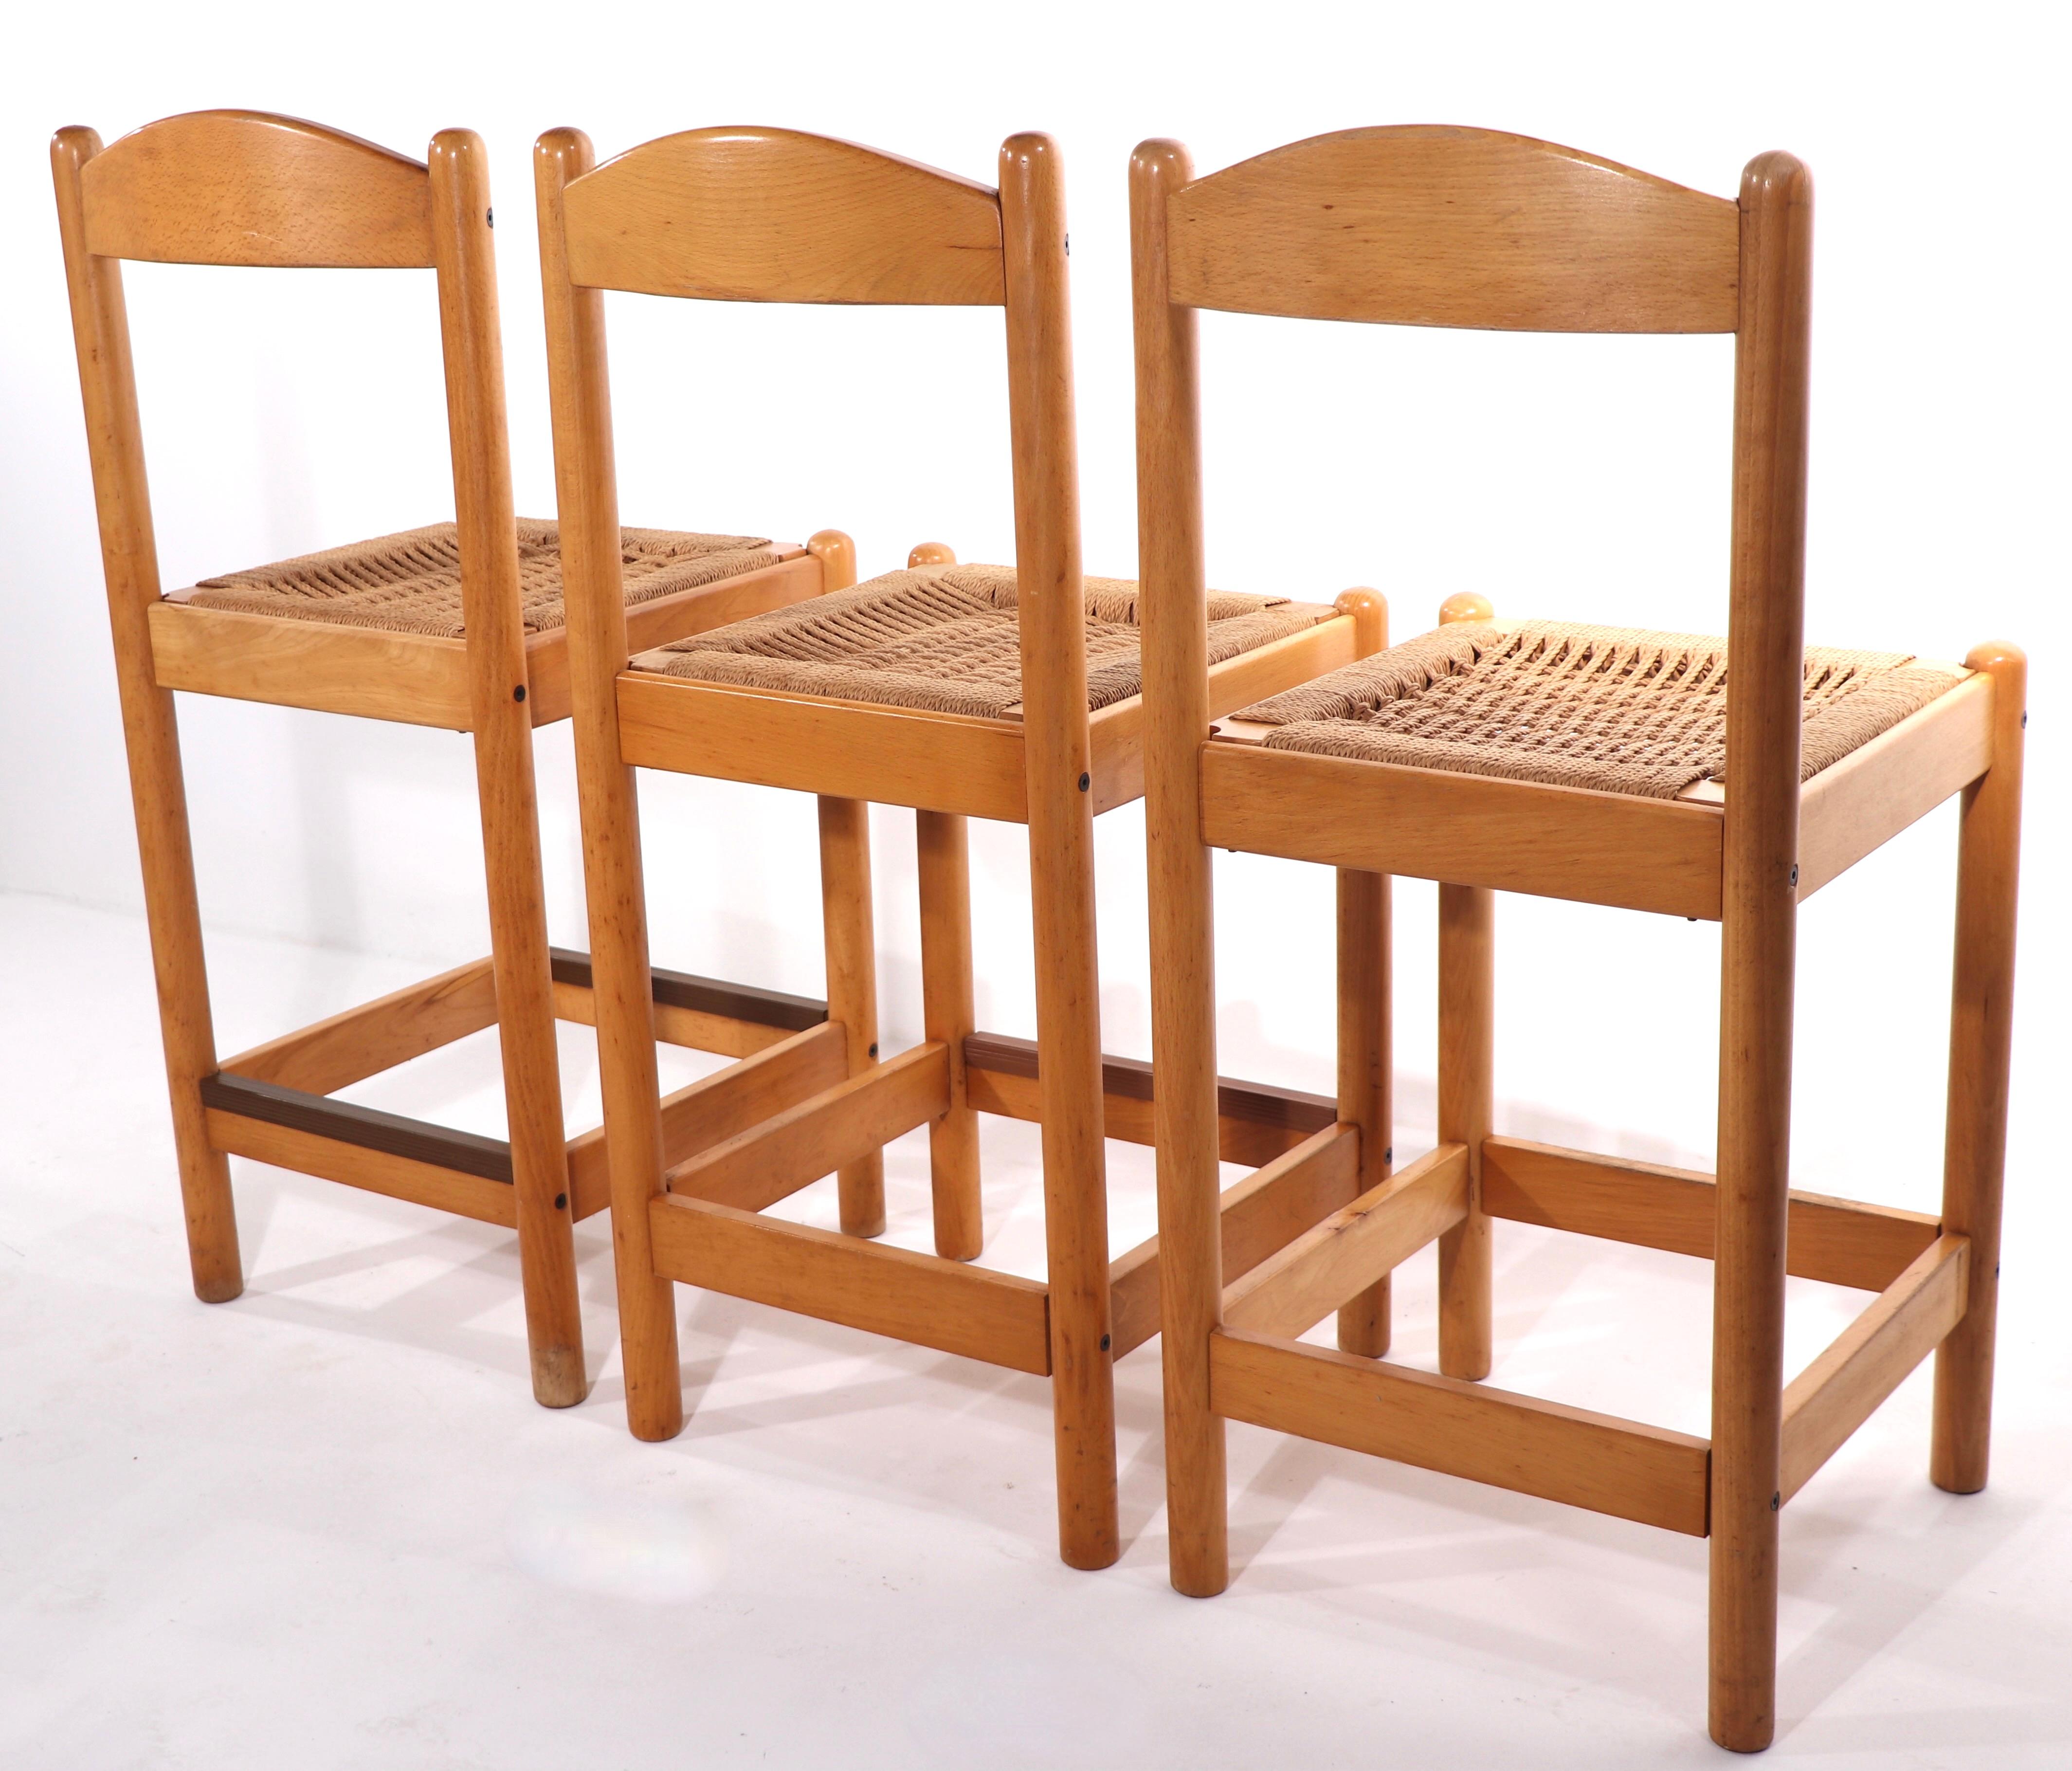 3 Post Modern Blonde Beechwood Stools Made in Italy 7